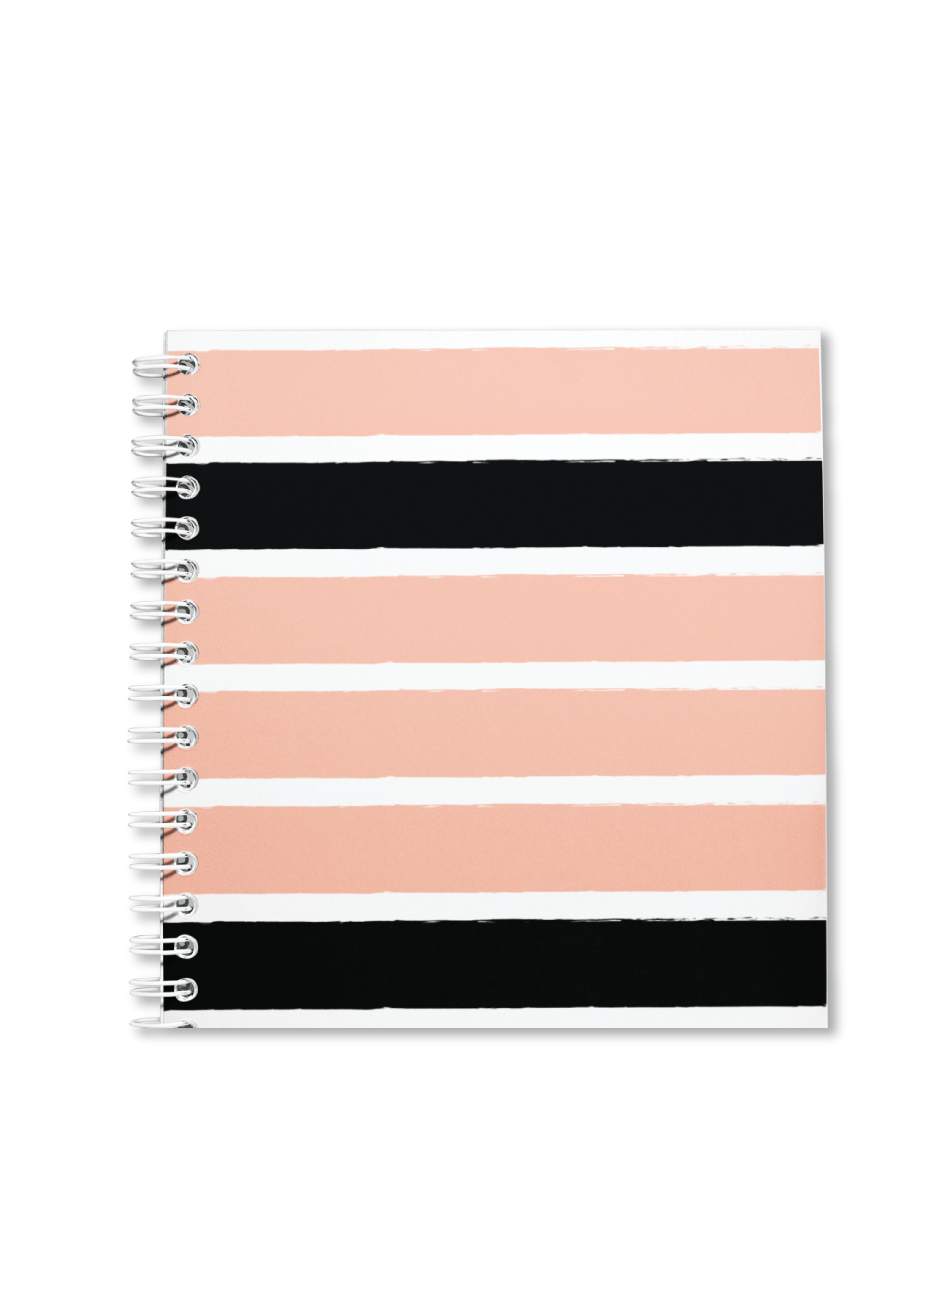 Coral Veins Notebook | Available in various sizes